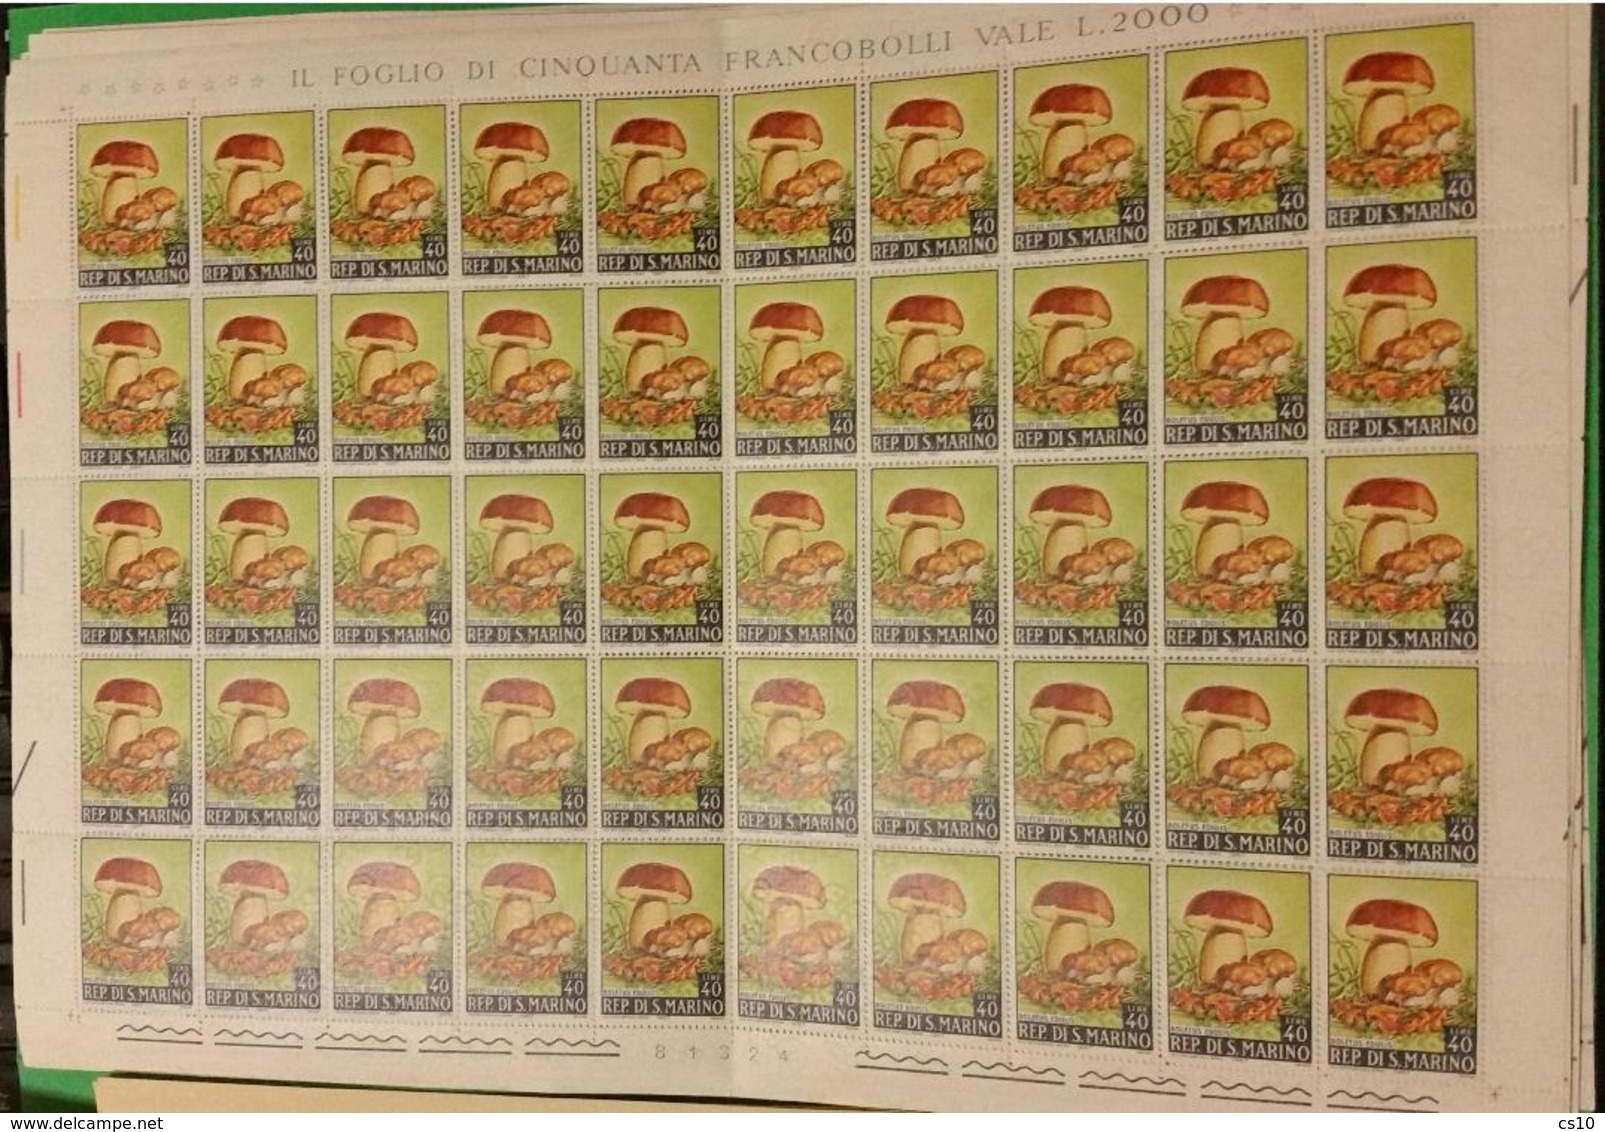 Mushrooms Funghi Champignons San Marino 5v Issue In Cpl MNH Sheets Of 50pcs - Funghi